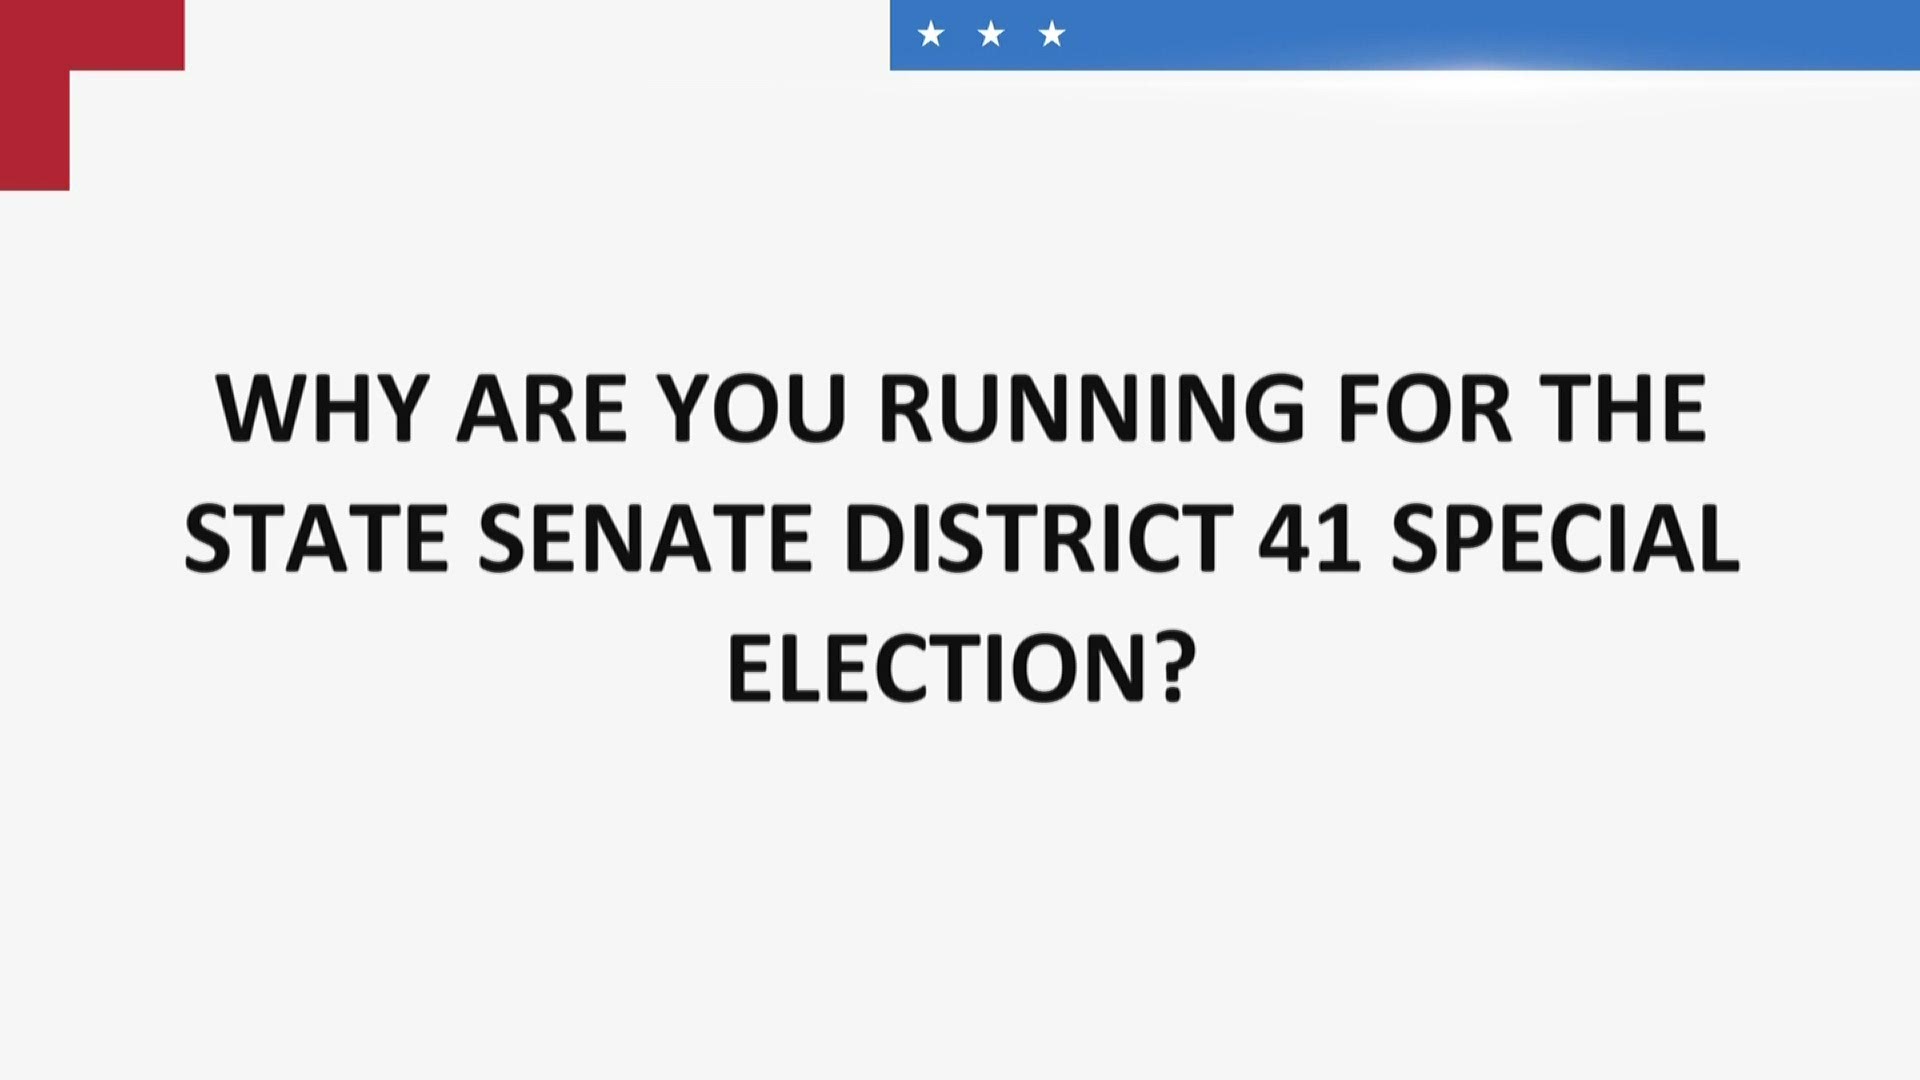 The special election for State Senate District 41 is Tuesday, January 26.